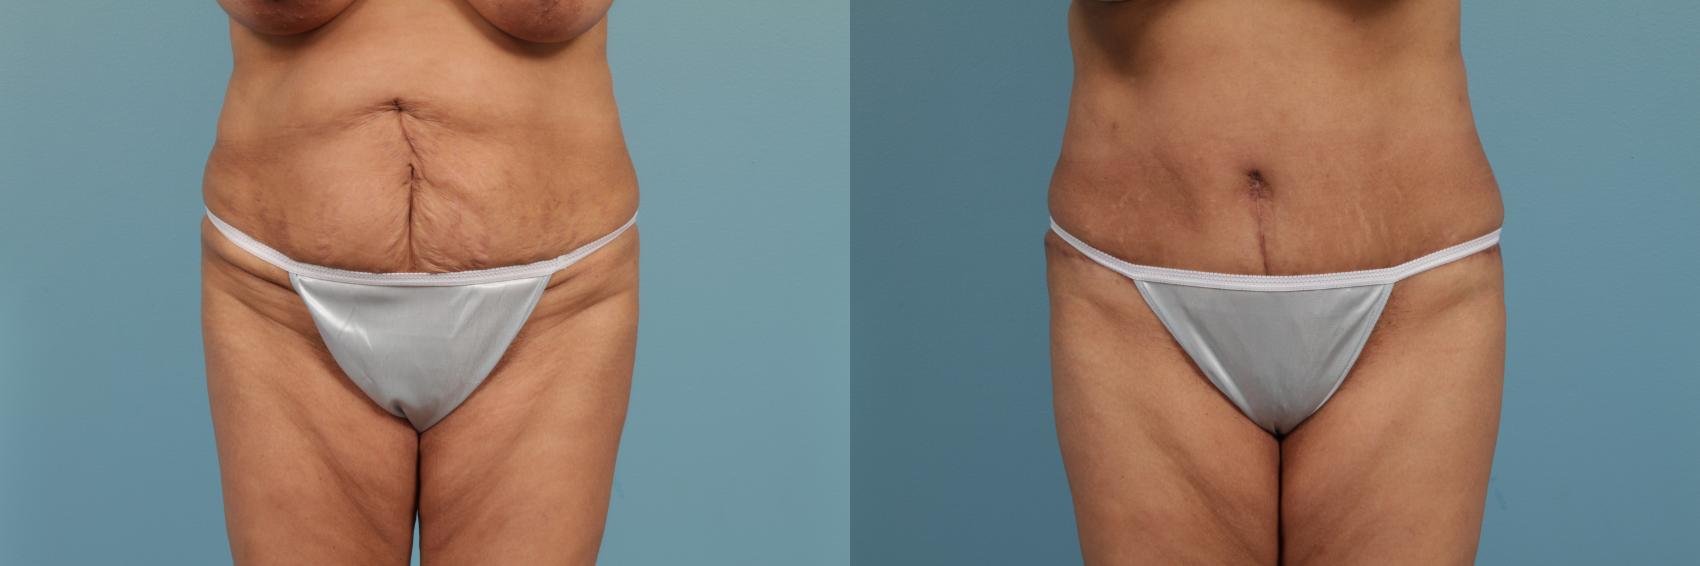 Abdominal Muscle Separation - Tummy Tuck Chicago